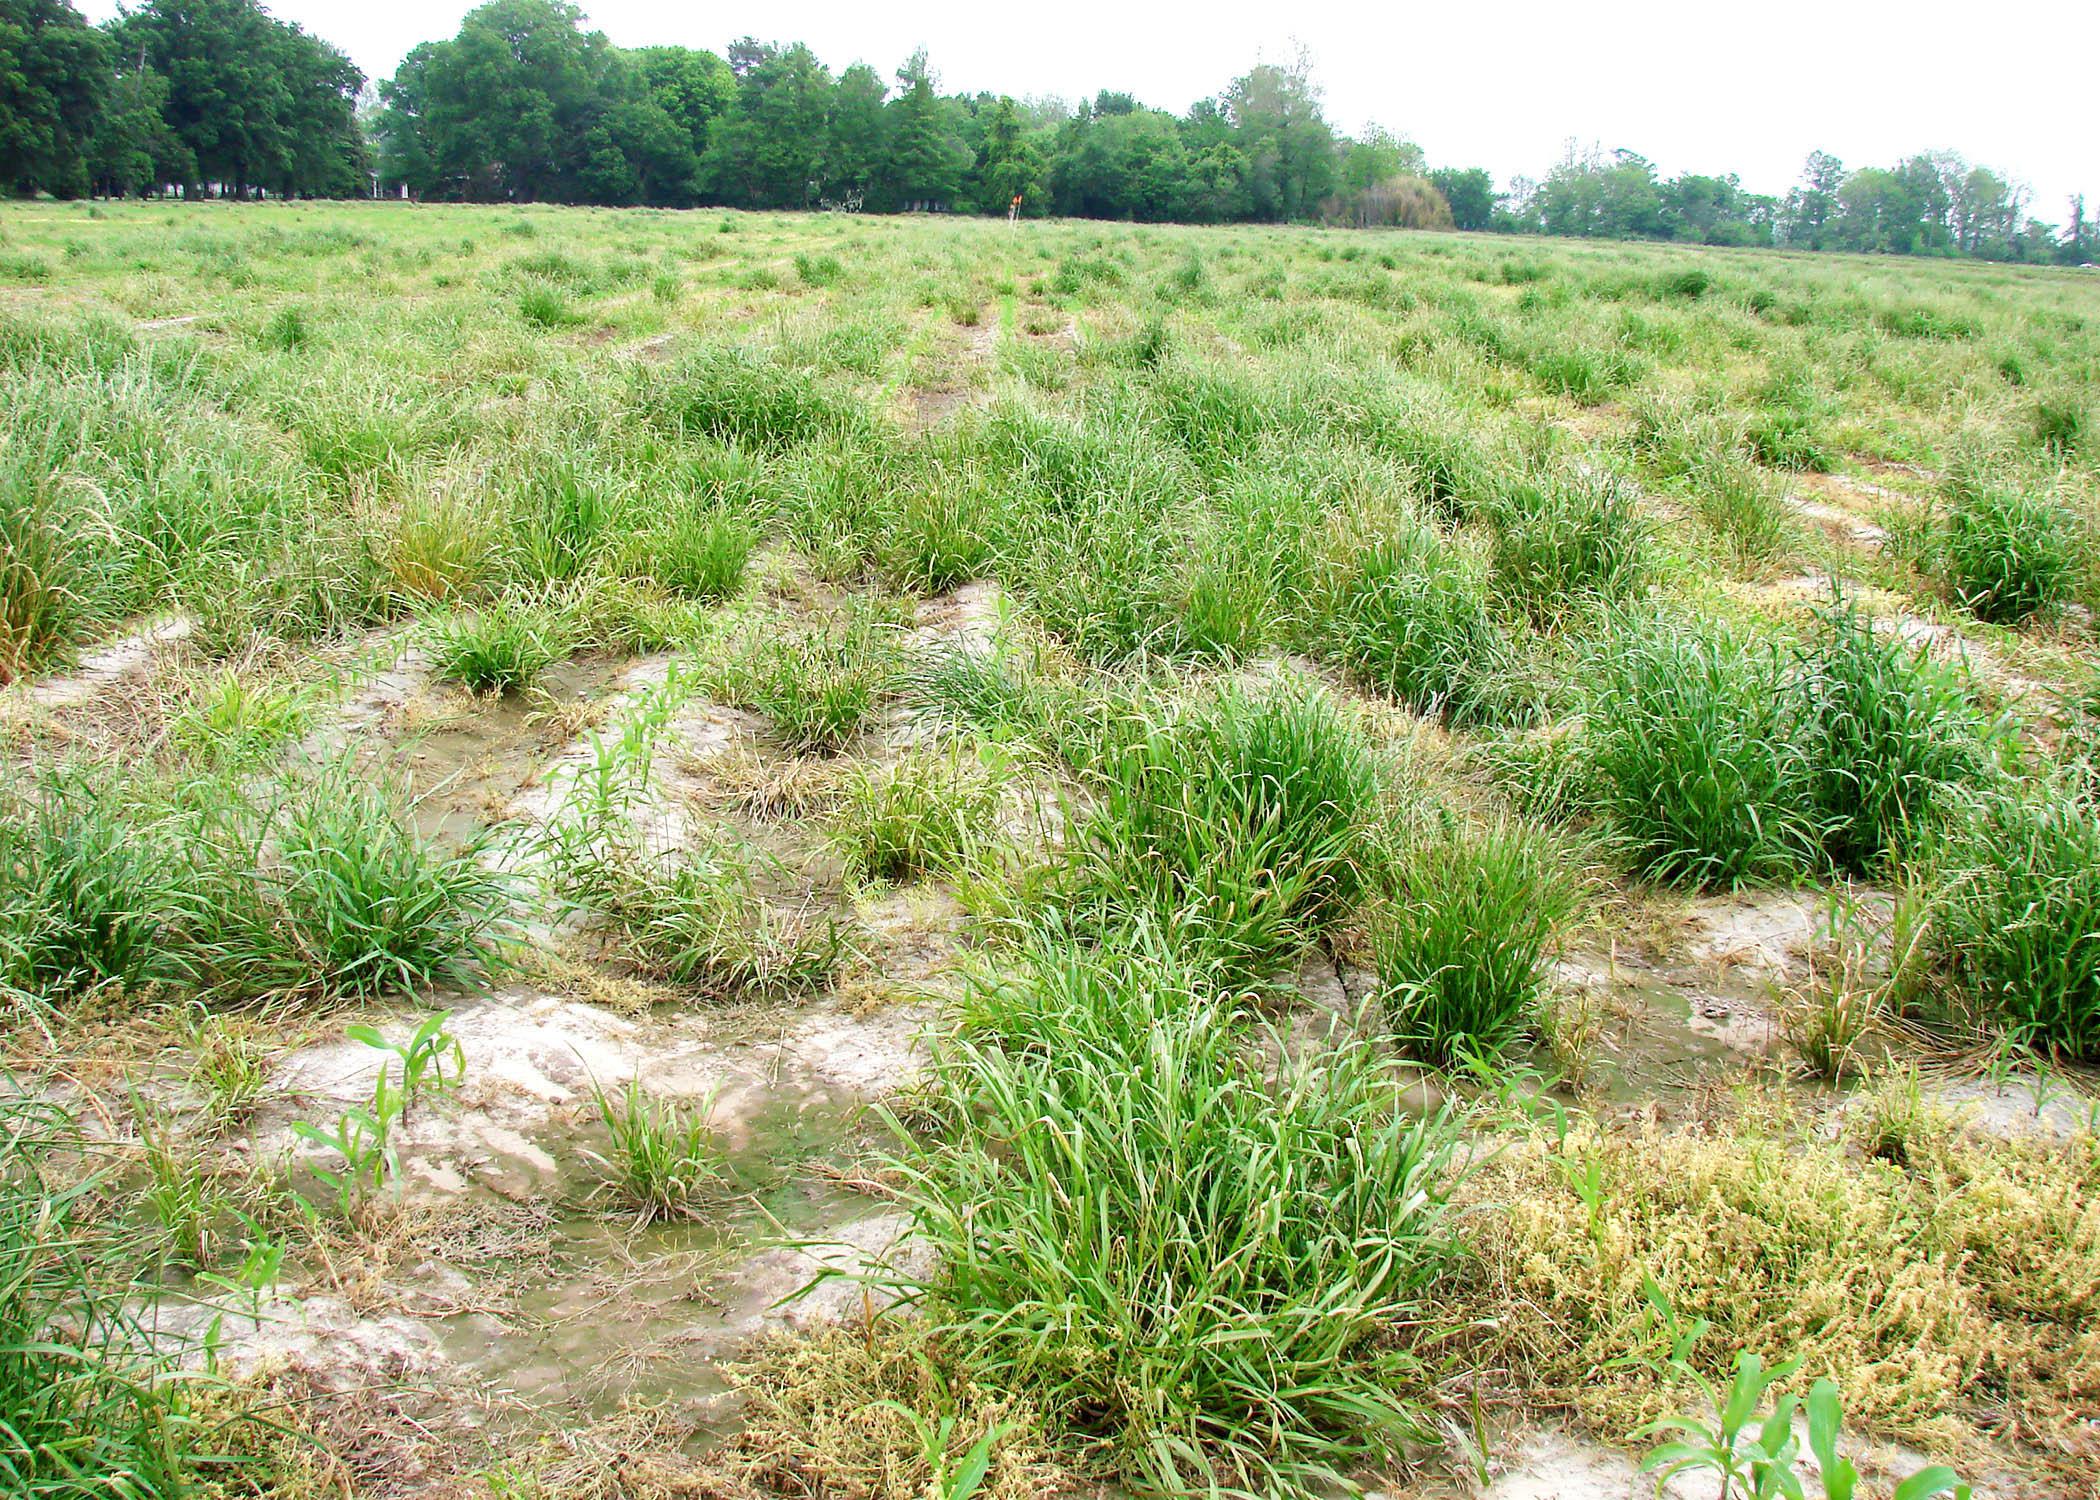 Mississippi State University weed scientists are leading the fight against glyphosate-resistant Italian ryegrass, such as this growing in a production corn field in Washington County in early spring 2013. (Photo by MSU Delta Research and Extension Center/Jason Bond)